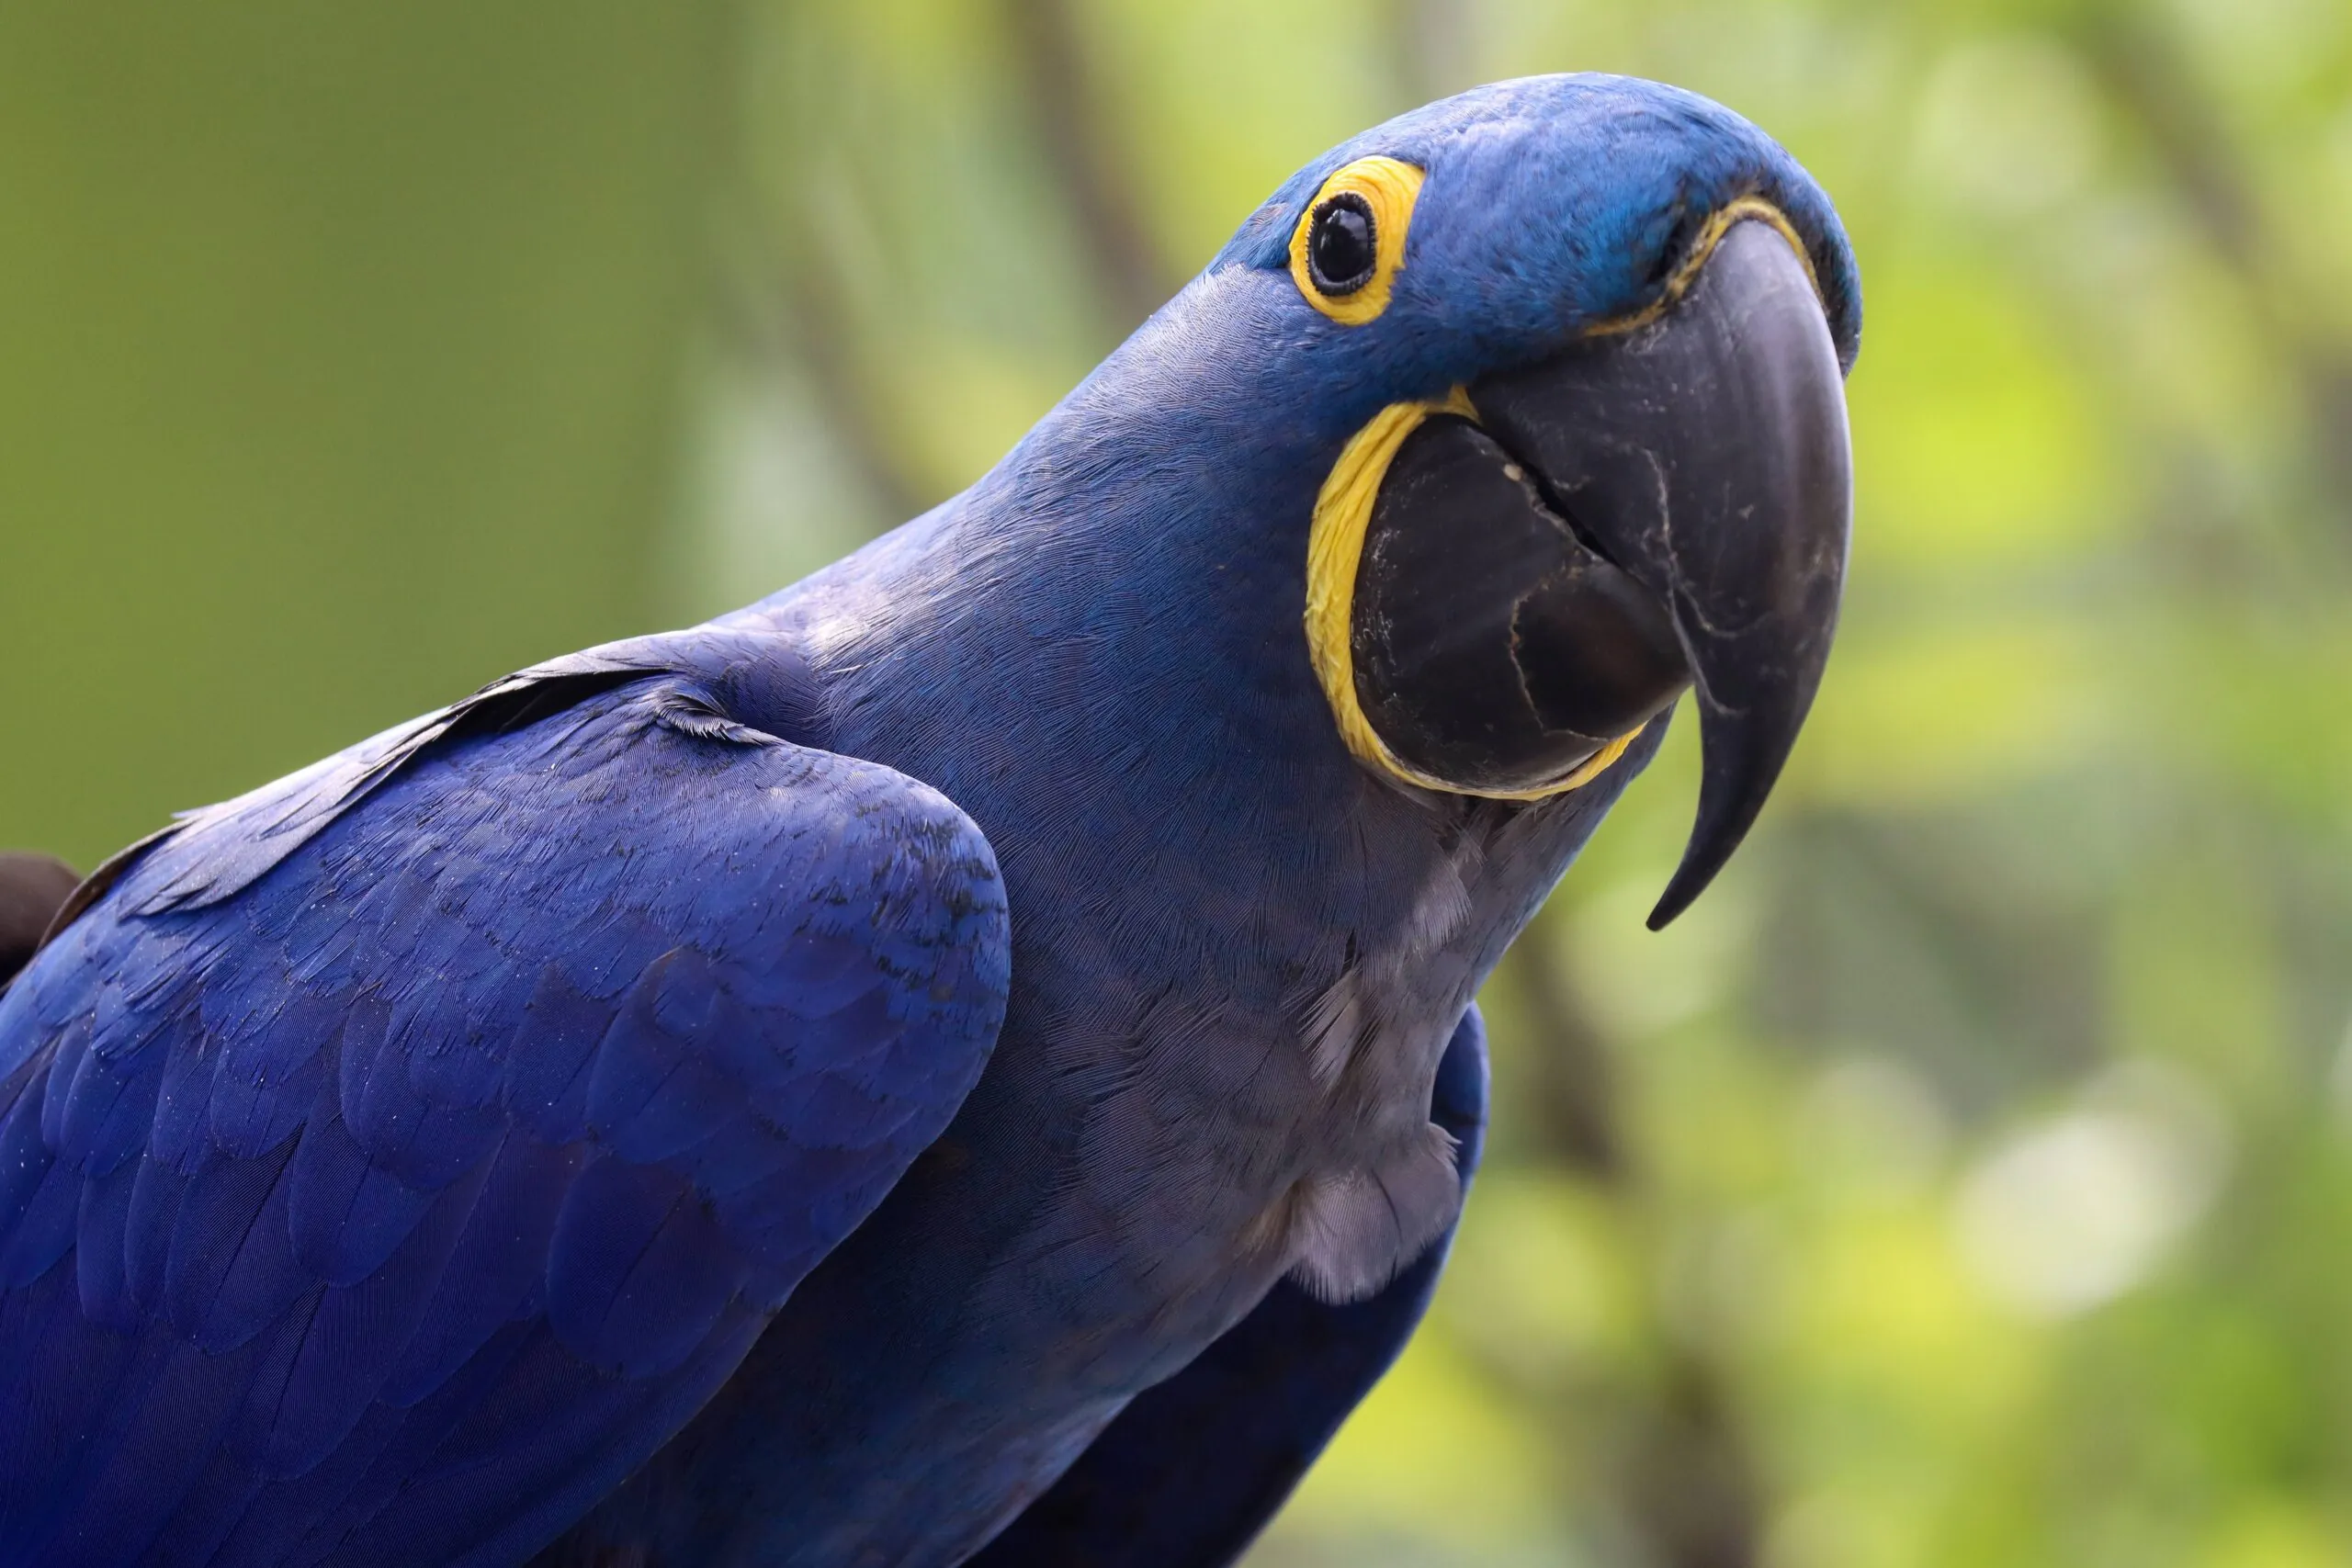 Hyacinth macaw shown in profile. His feathers are royal blue and there are bright yellow accents around his eyes and beak.